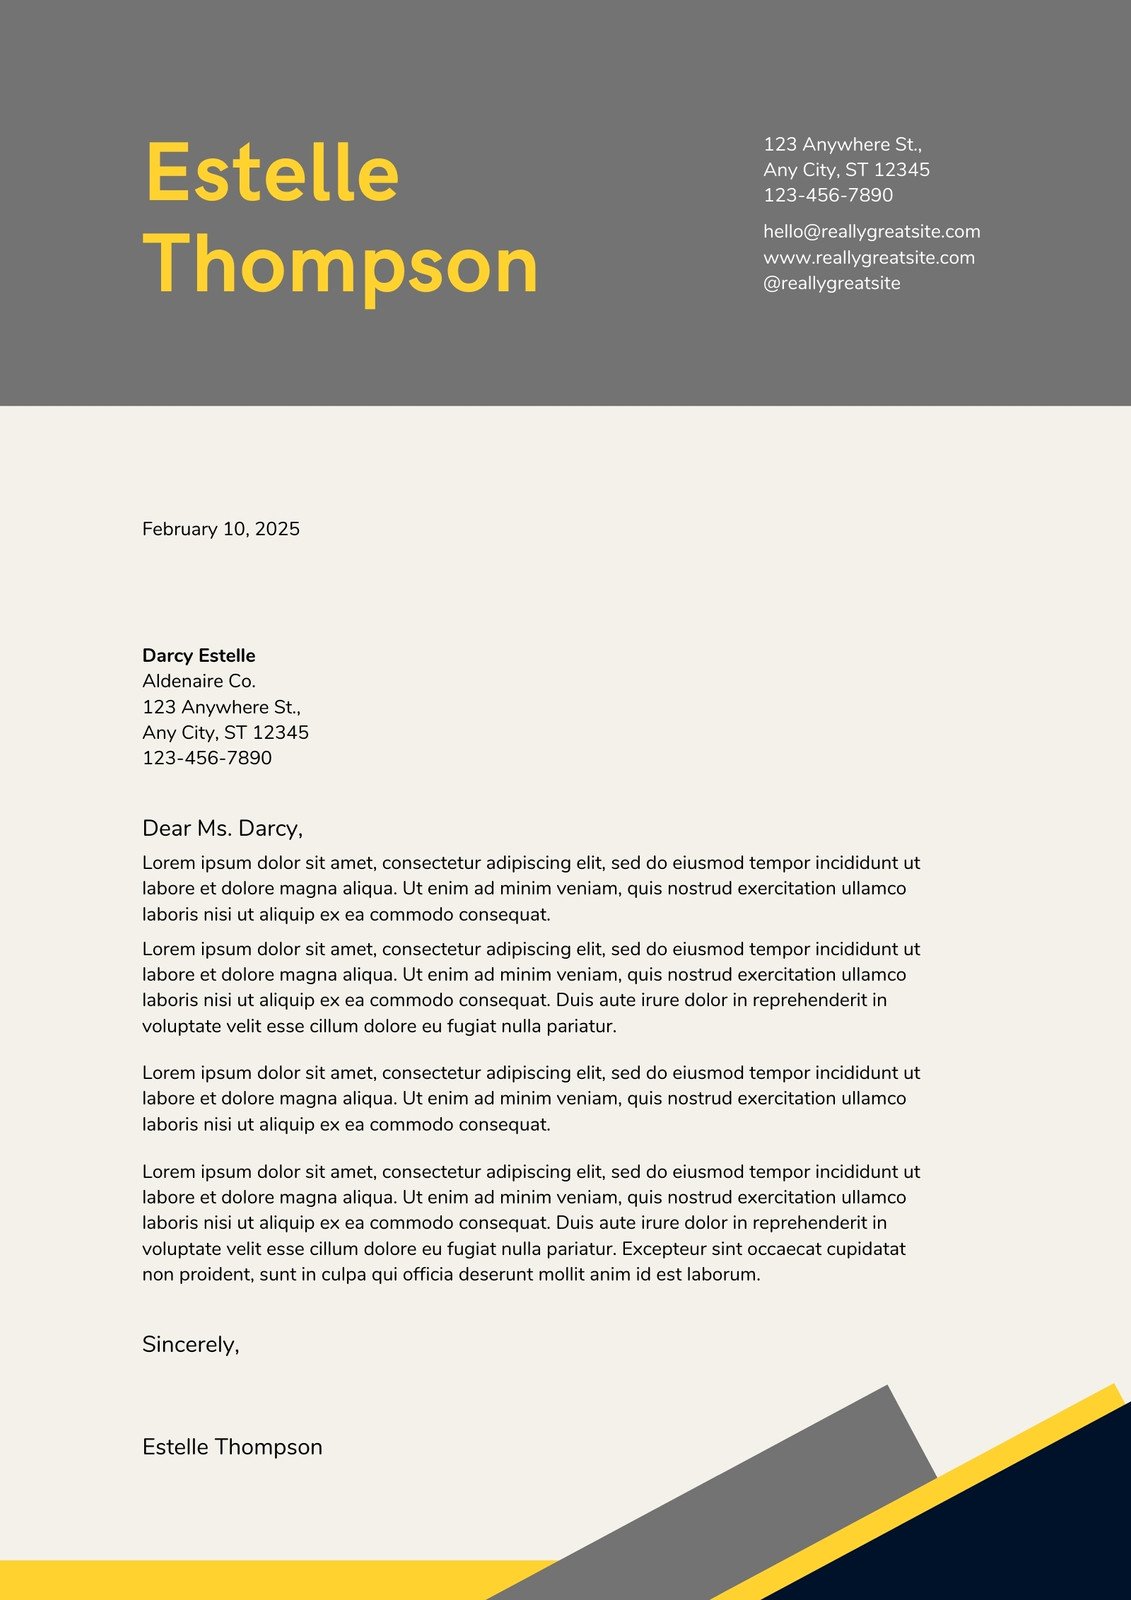 Free printable cover letter templates you can customize